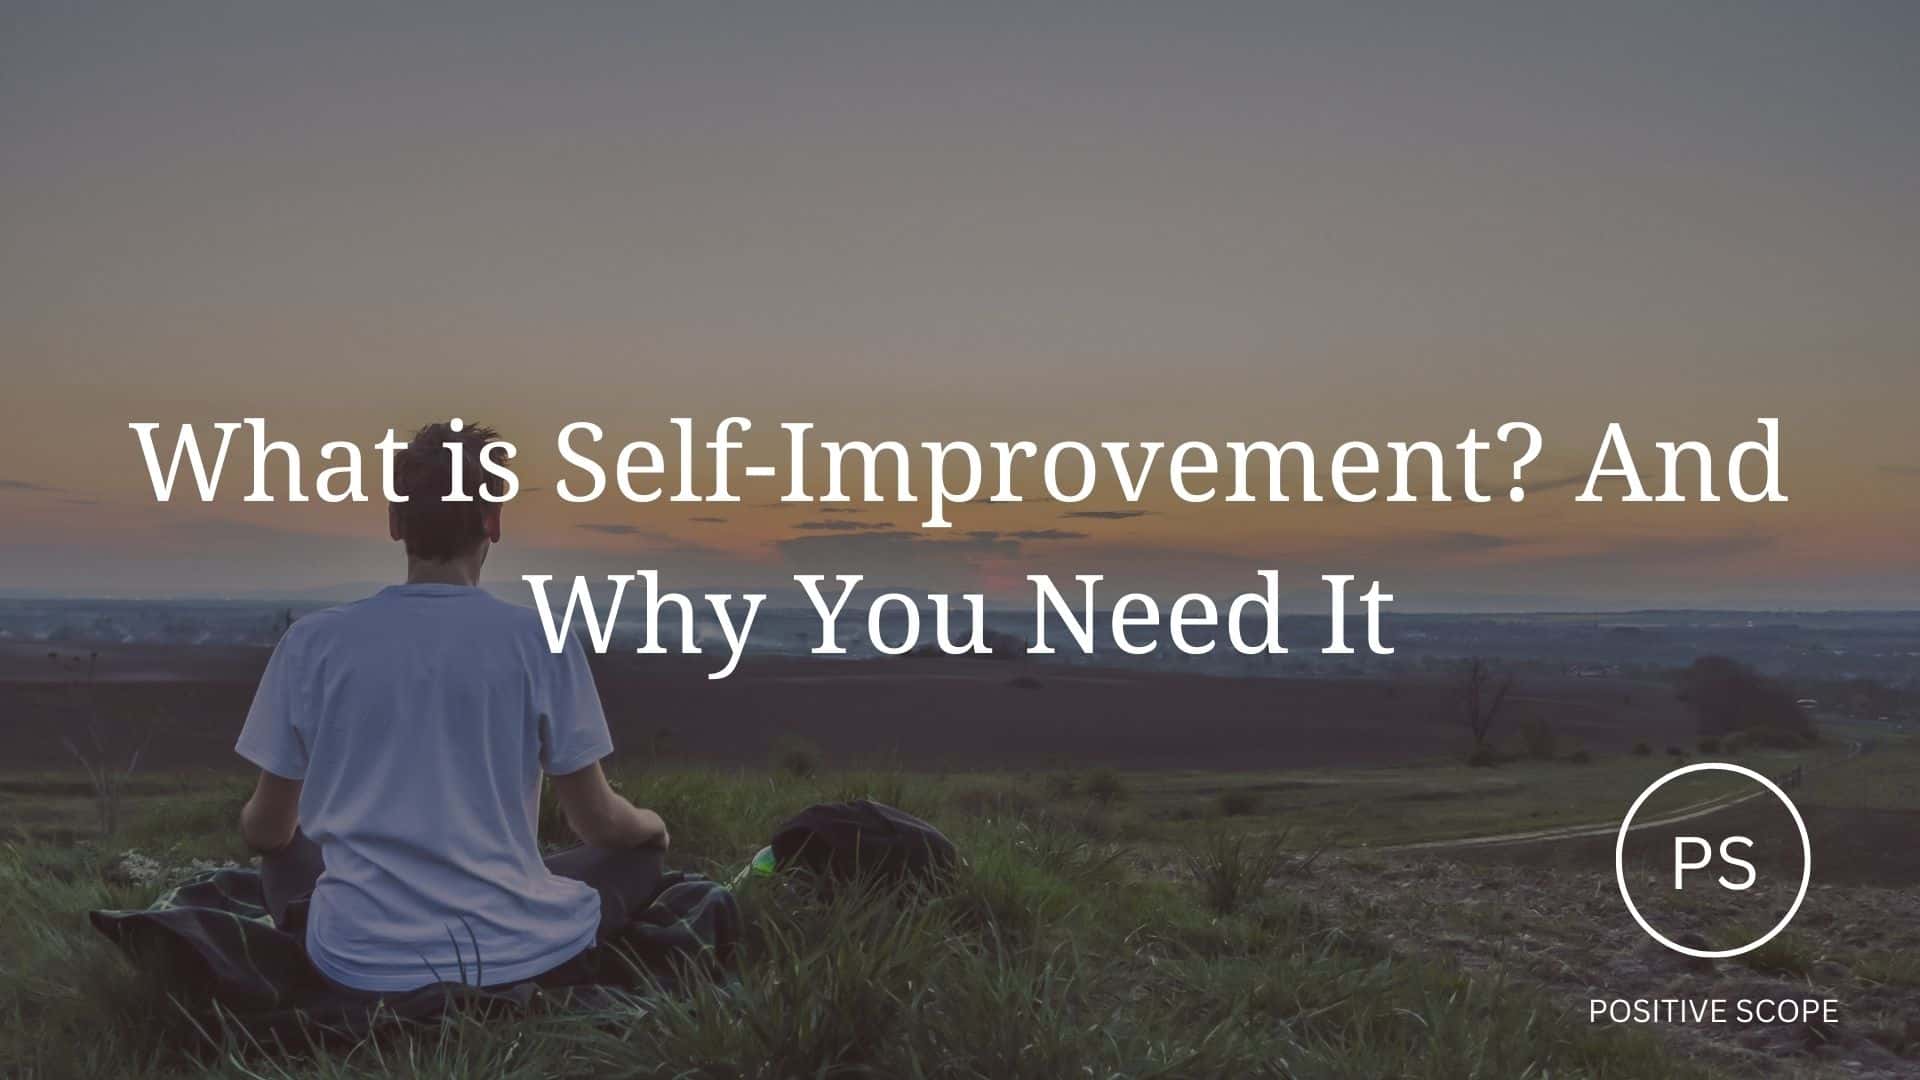 What is Self-Improvement? And Why You Need It